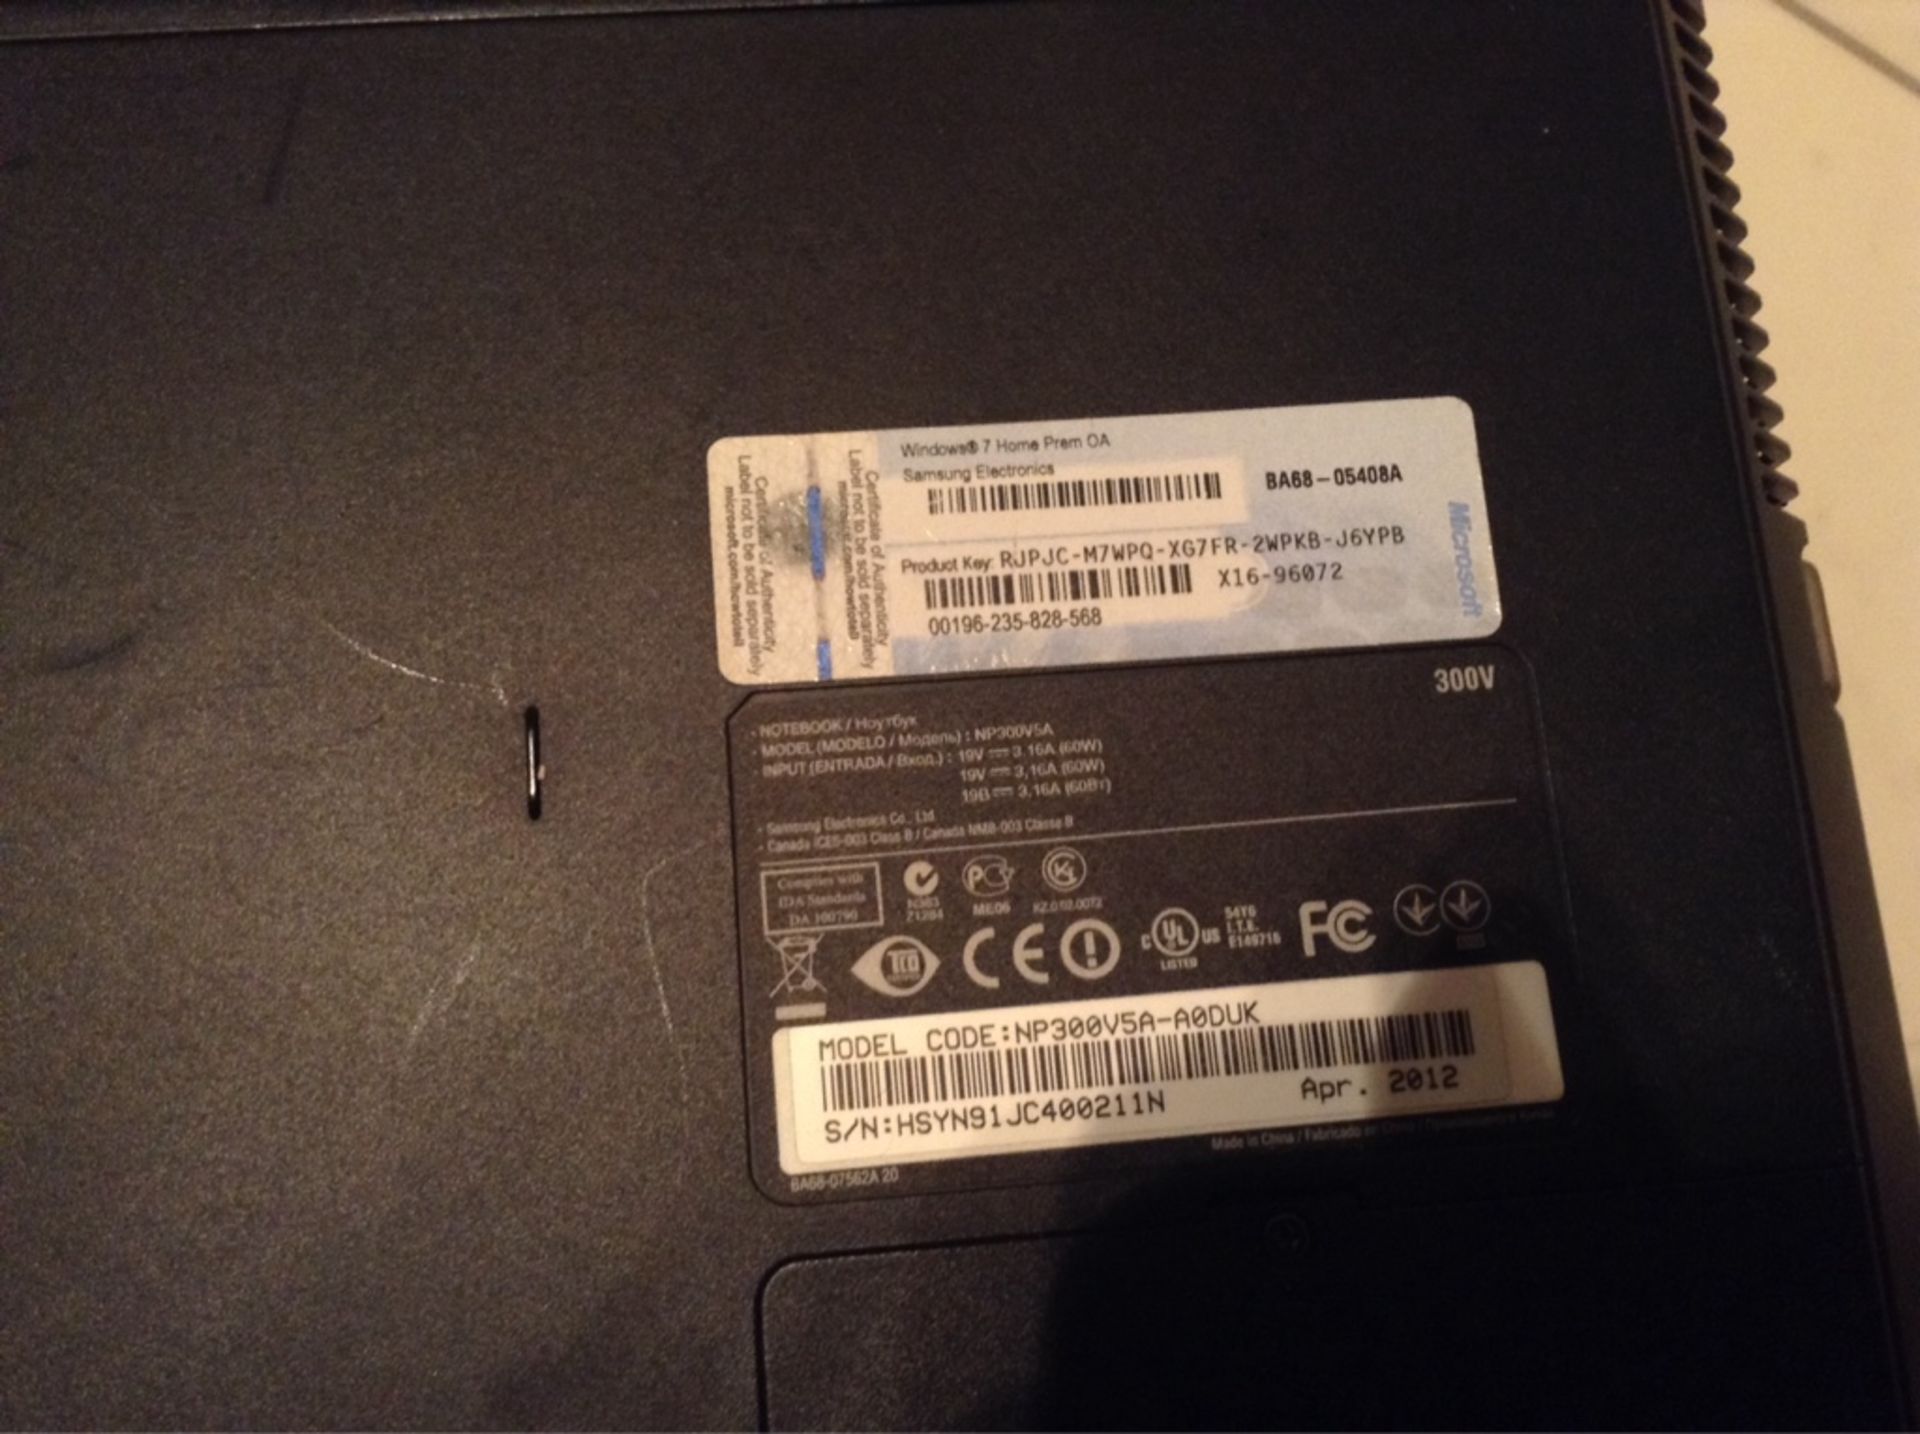 samsung notebook np300v5a 6/8gb windows 10 installed unregistered but problems loading needs wipe - Image 10 of 10